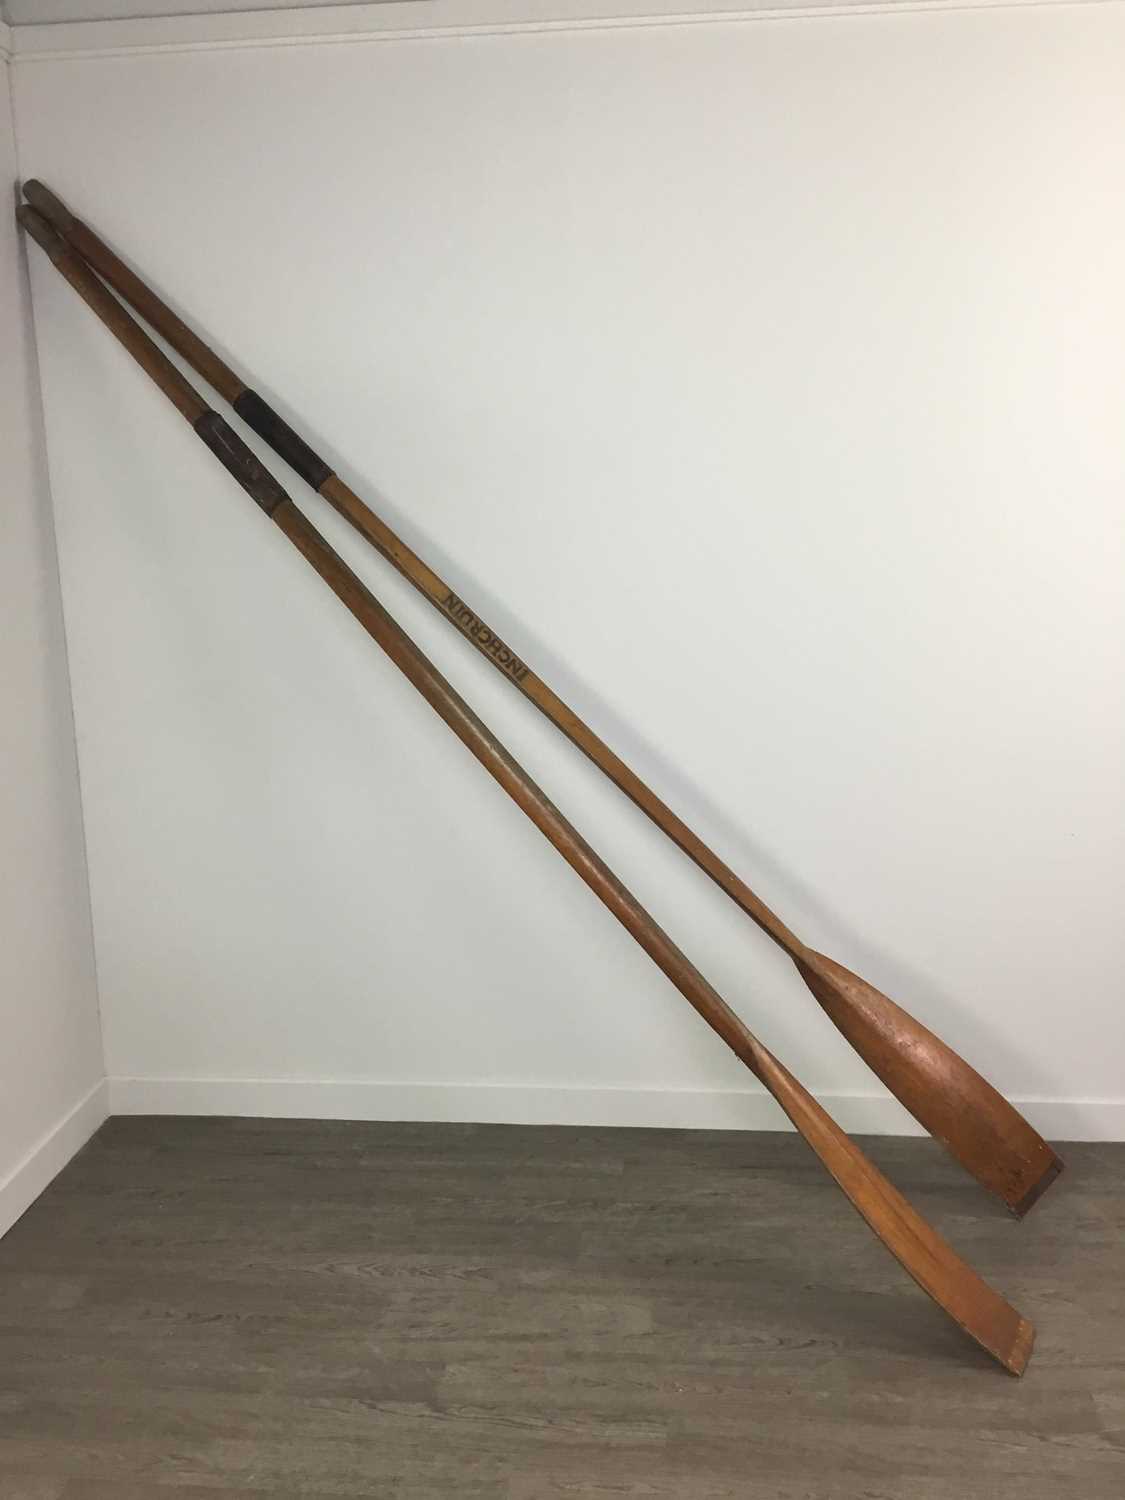 Lot 33 - A PAIR OF BOAT OARS AND AN ANCHOR